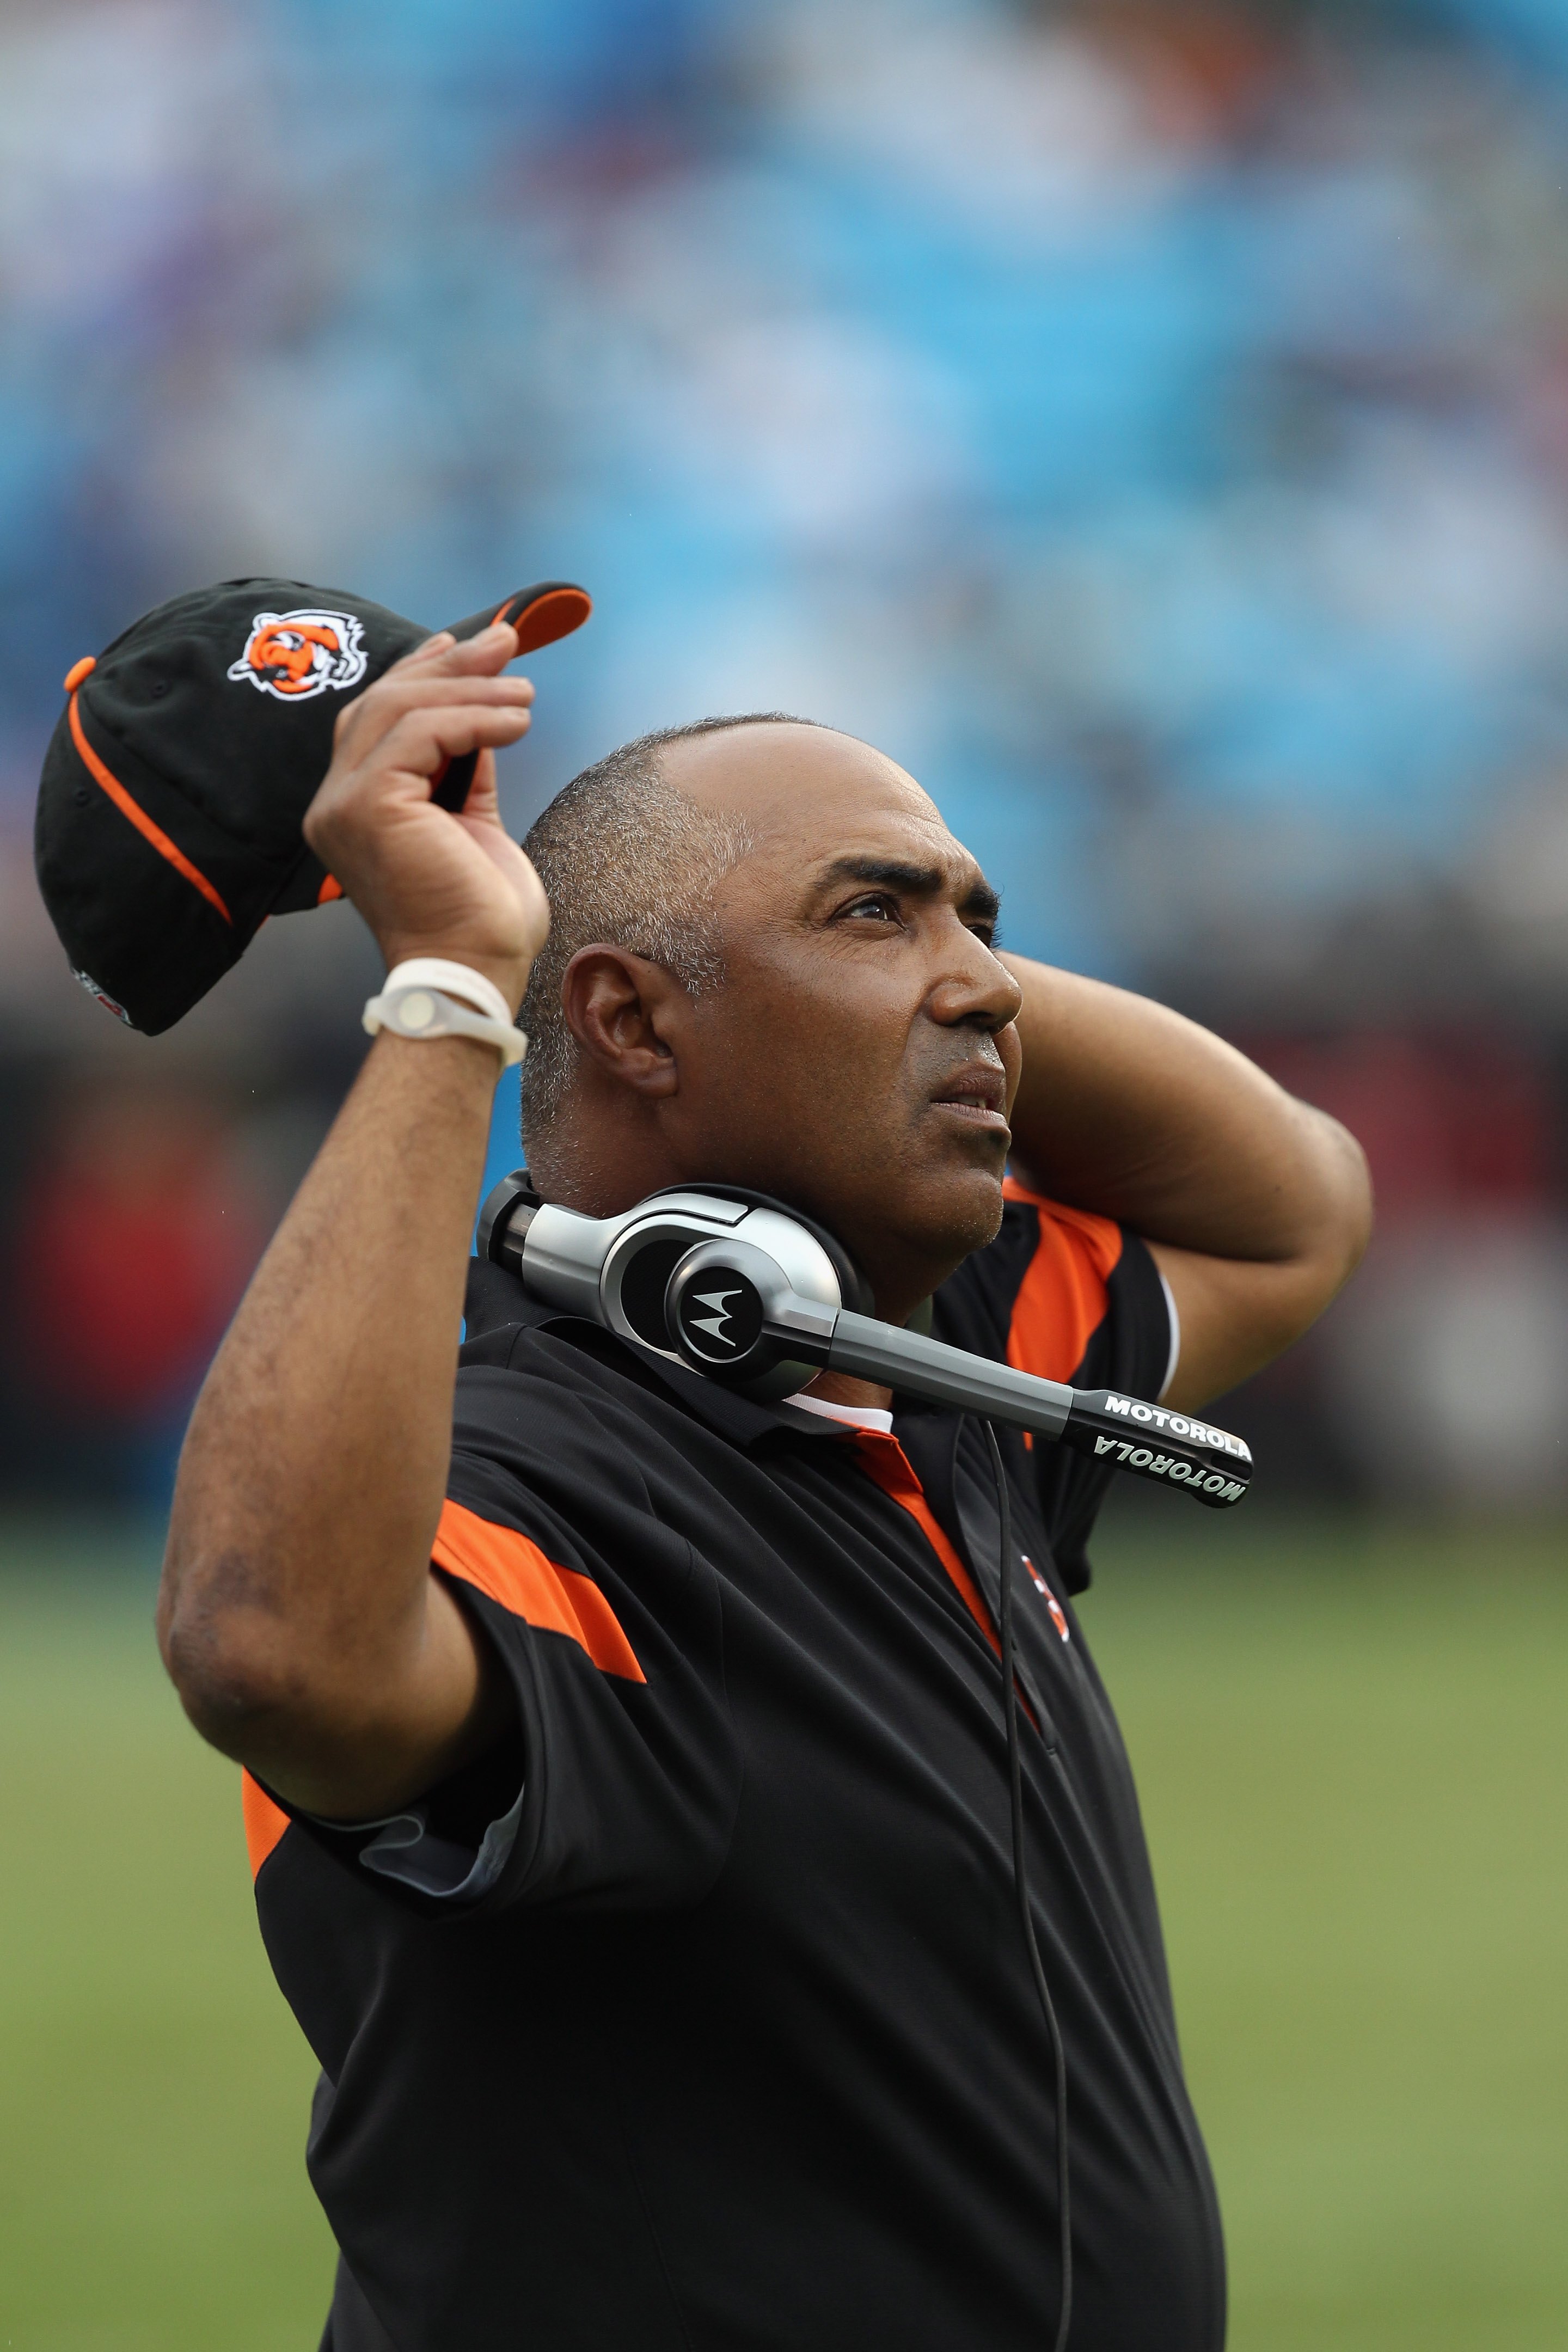 Marvin Lewis Ranked No. 11 in Head Coach Power Rankings